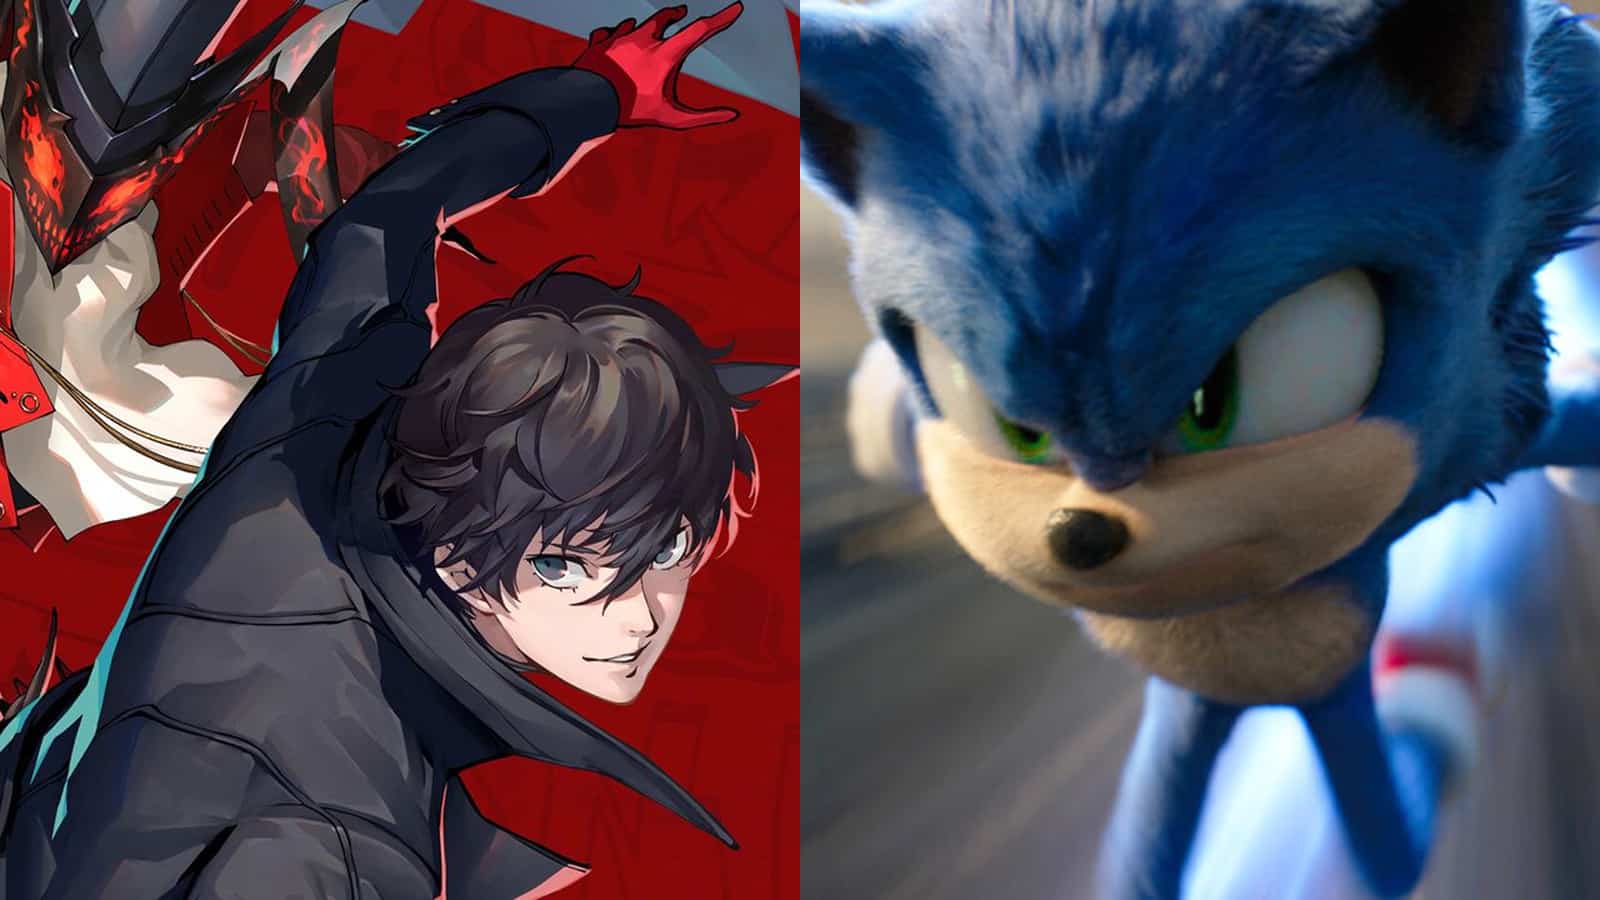 An image of Persona 5 Strikers and Sonic The Hedgehod 2 by Sega